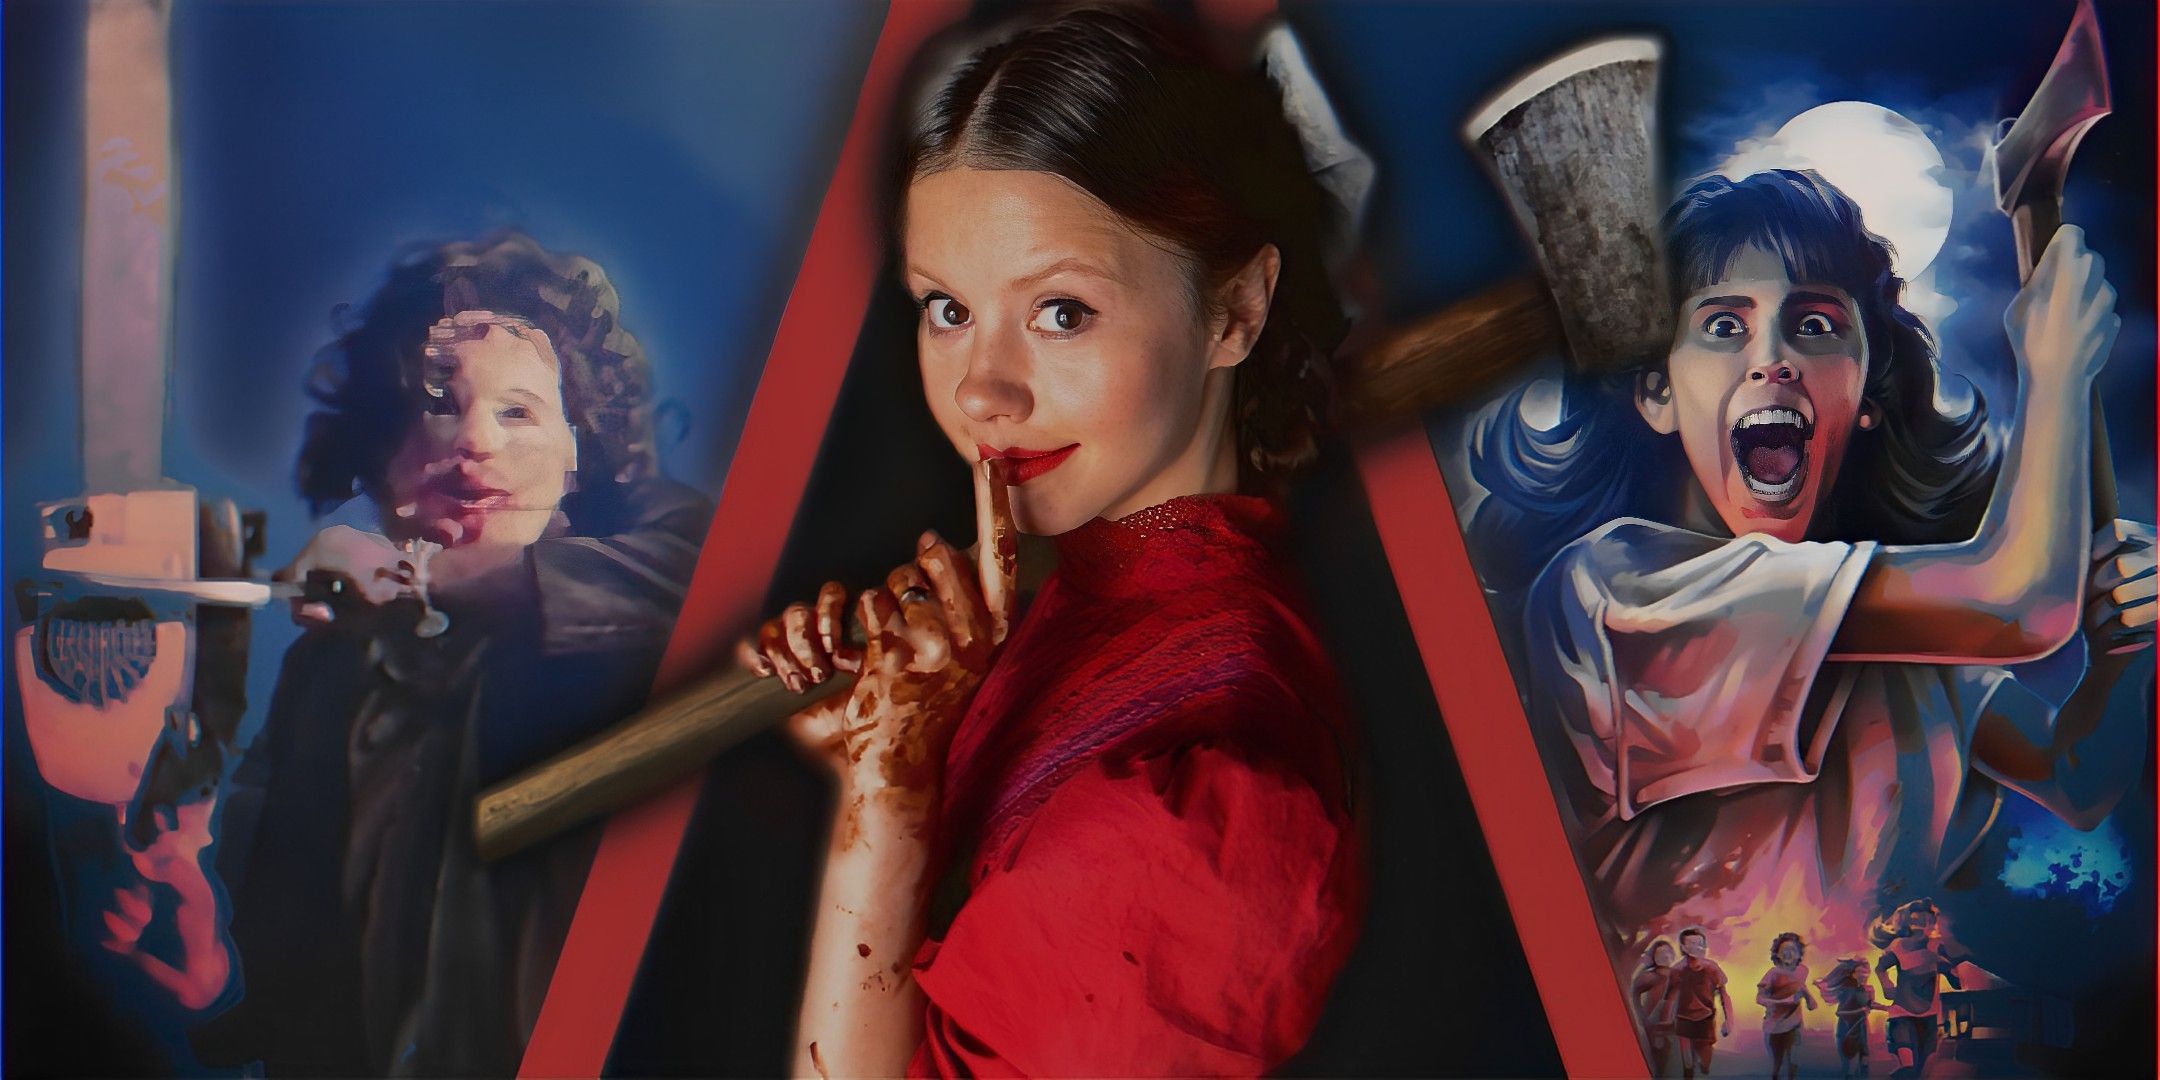 Mia Goth’s Pearl holding an axe in front of Sleepaway Camp poster and Leatherface with a chainsaw.